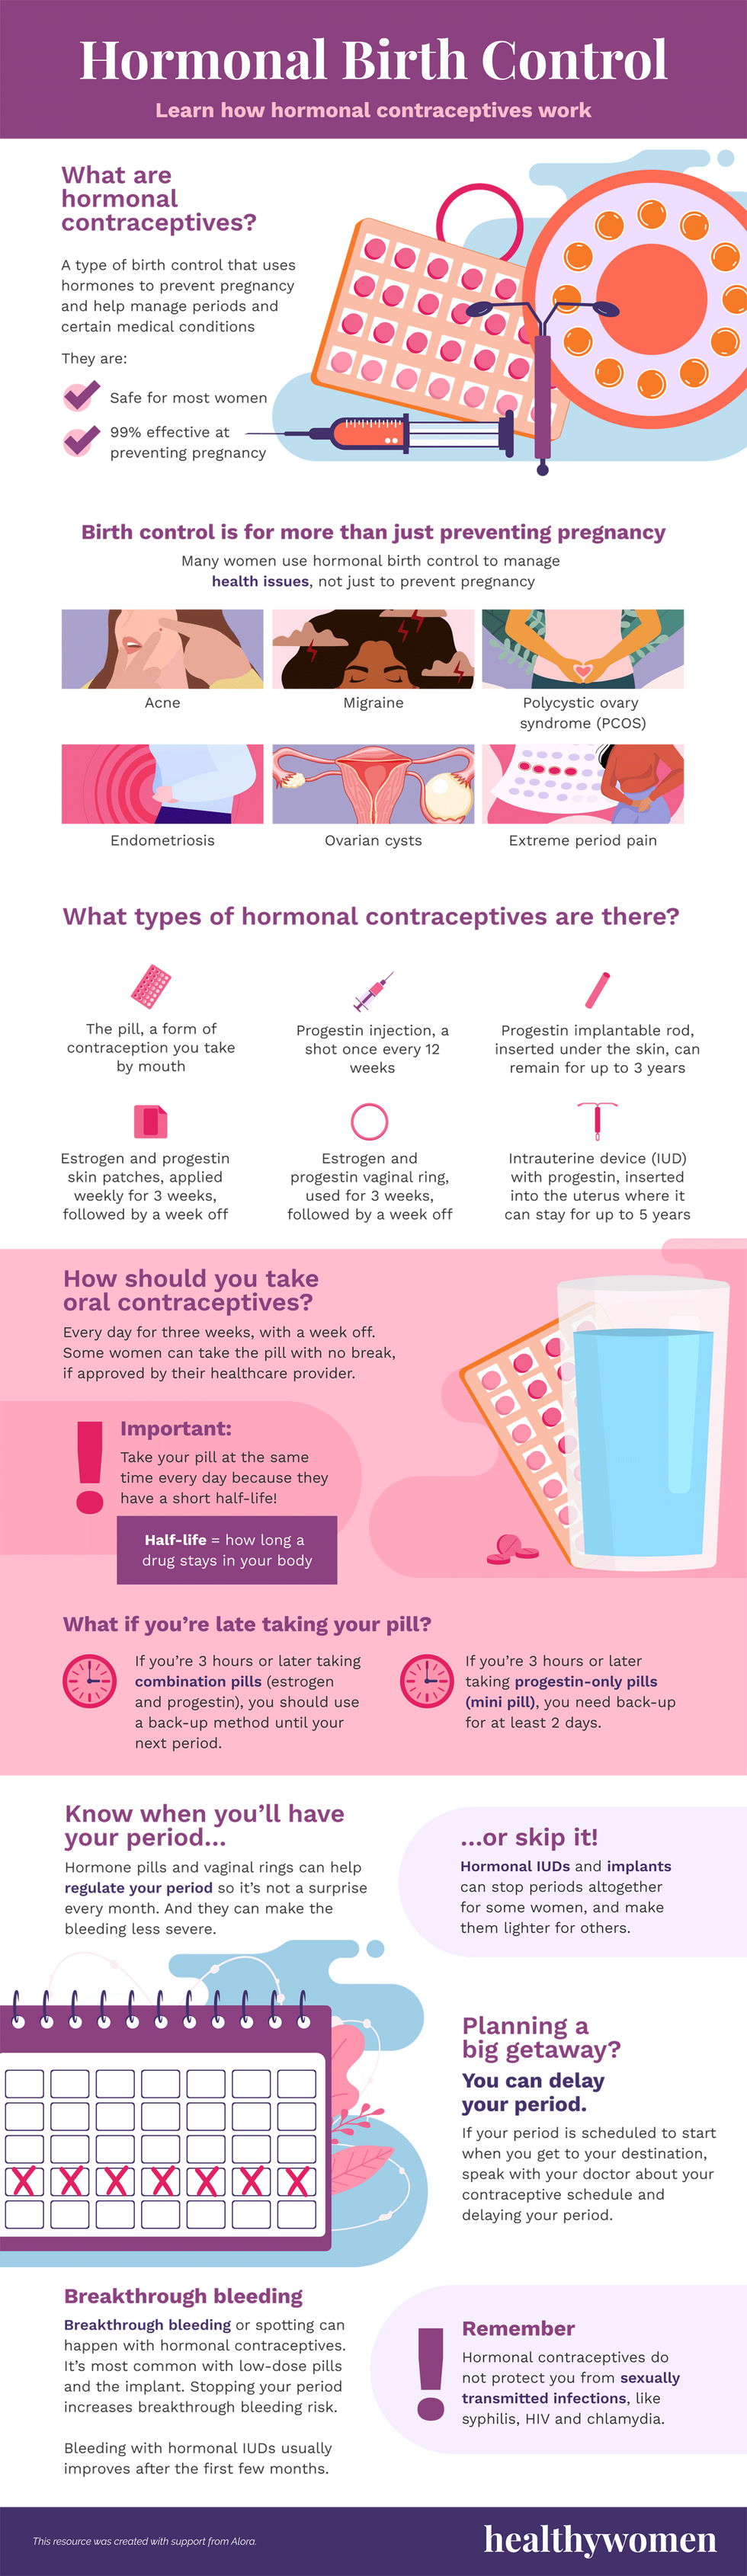 Infographic Hormonal Birth Control. Click the image to open the PDF